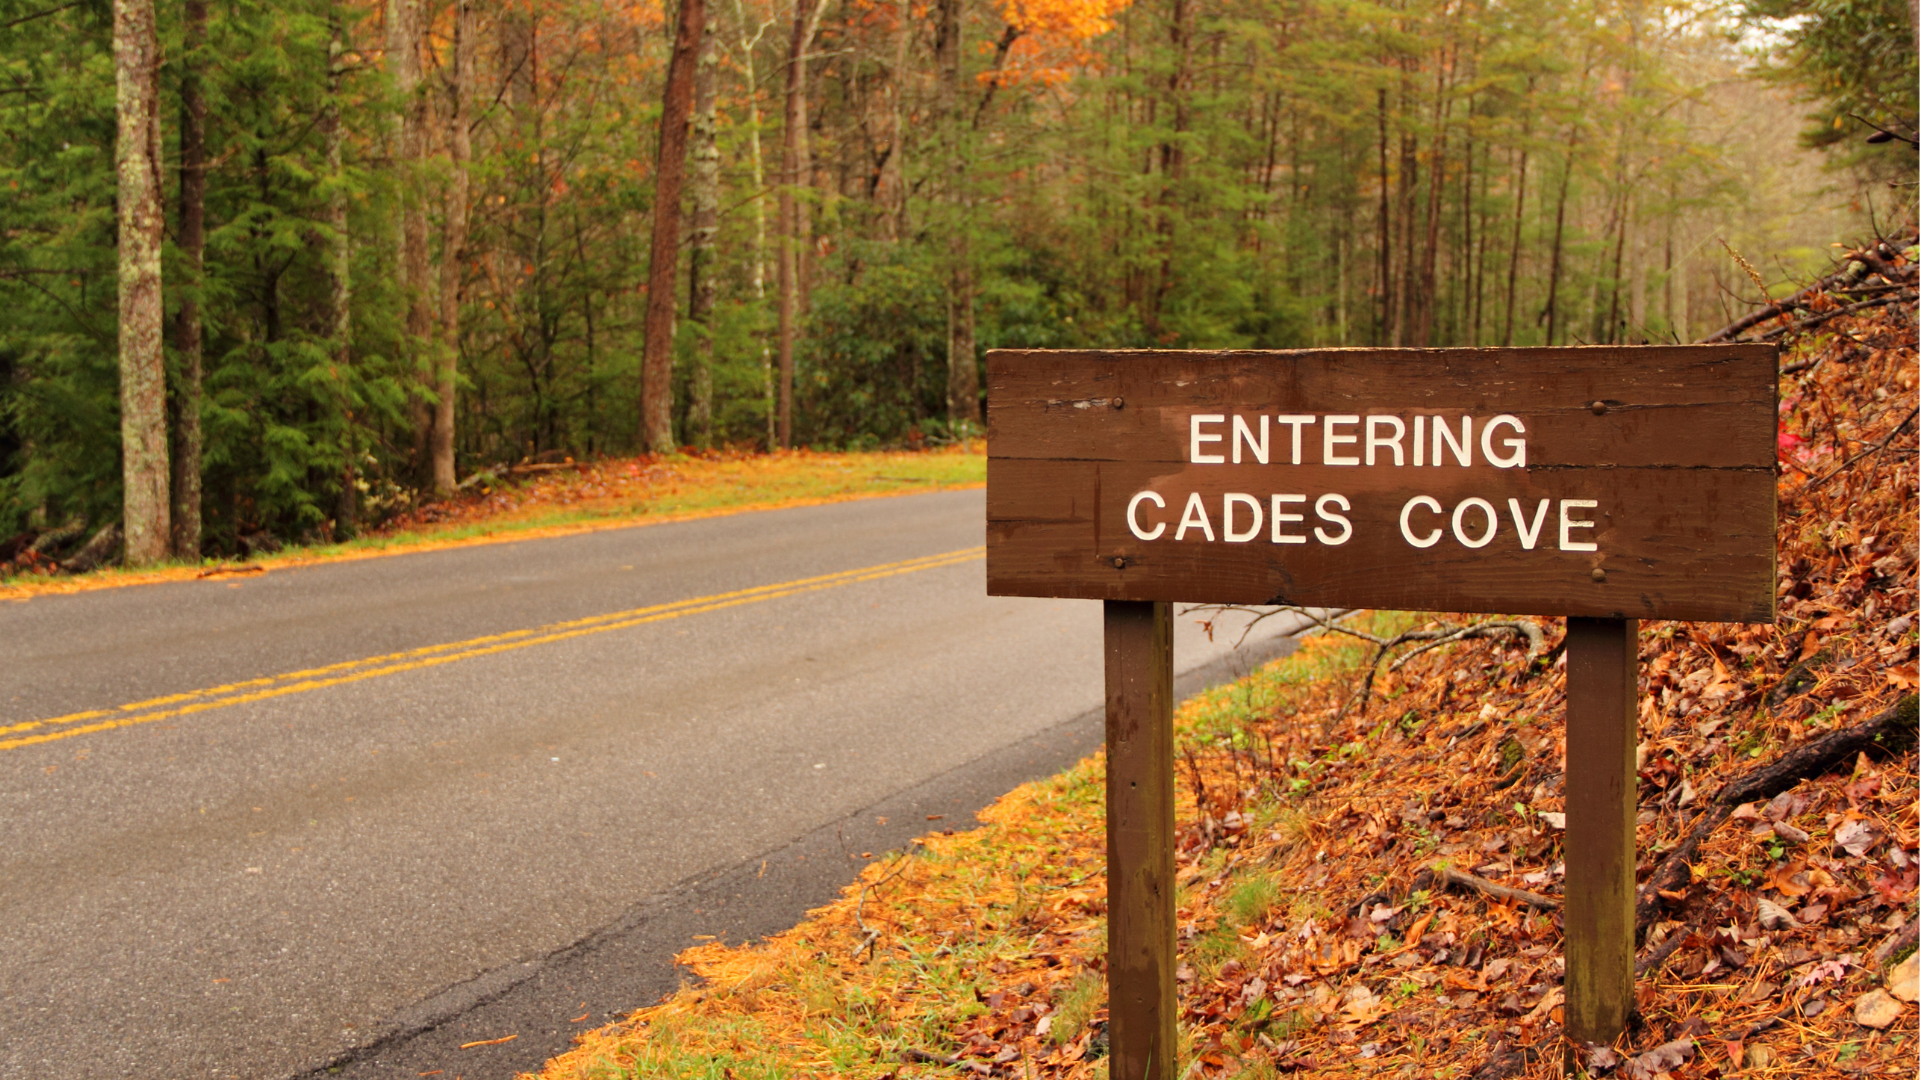 Top 10 Things to do in Cades Cove